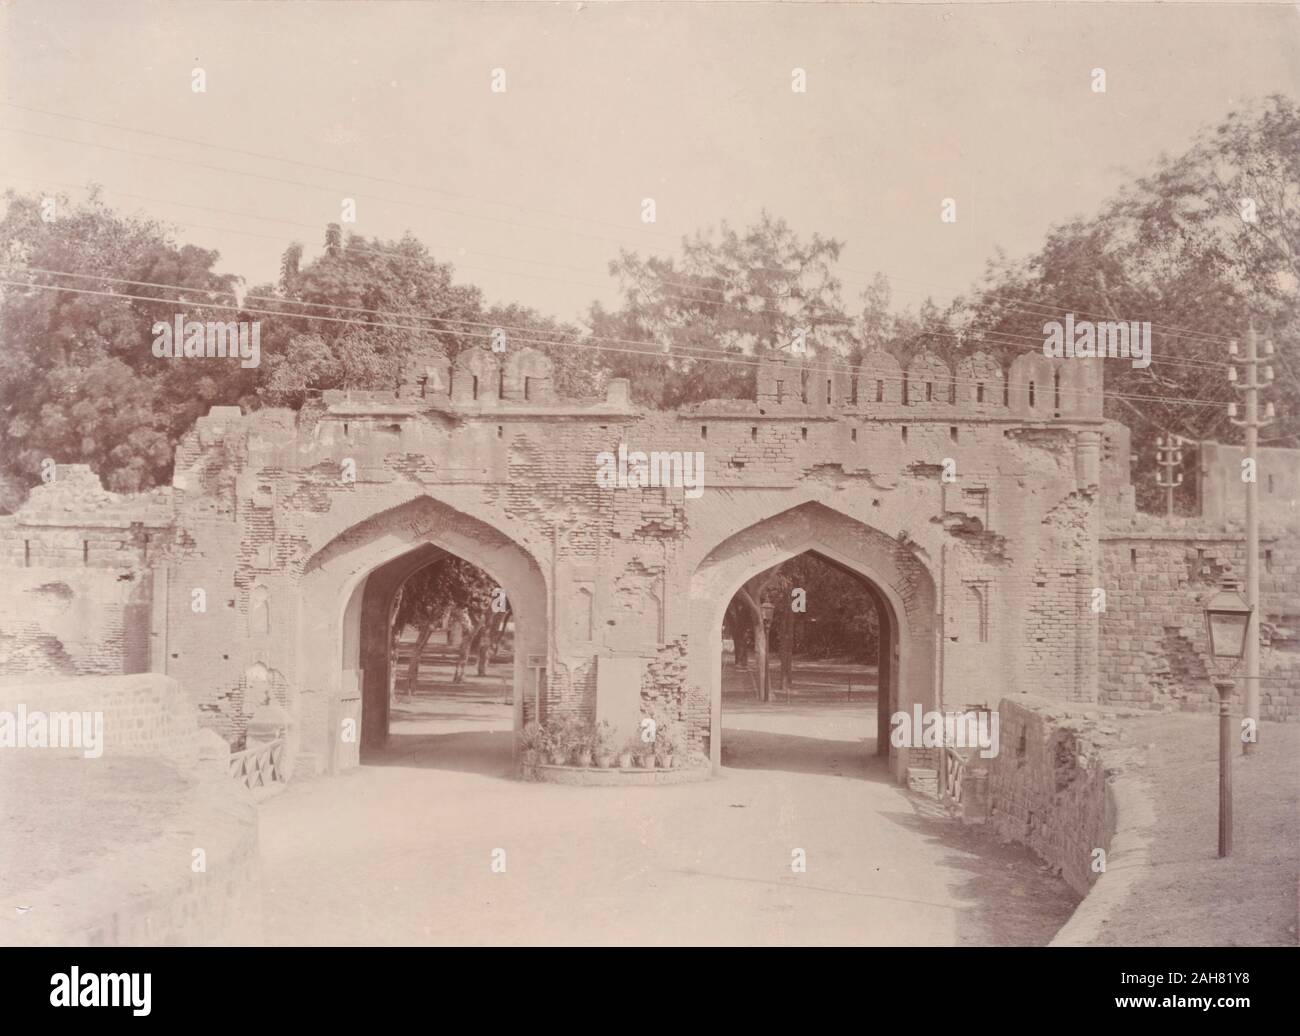 India, View of the Cashmere (Kashmir) Gate, the scene of a battle between British troops and Indian sepoys during the Indian Rebellion (1857-58). Original manuscript caption: The Cashmere Gate Delhi, circa 1890. 2003/071/1/1/2/49. Stock Photo